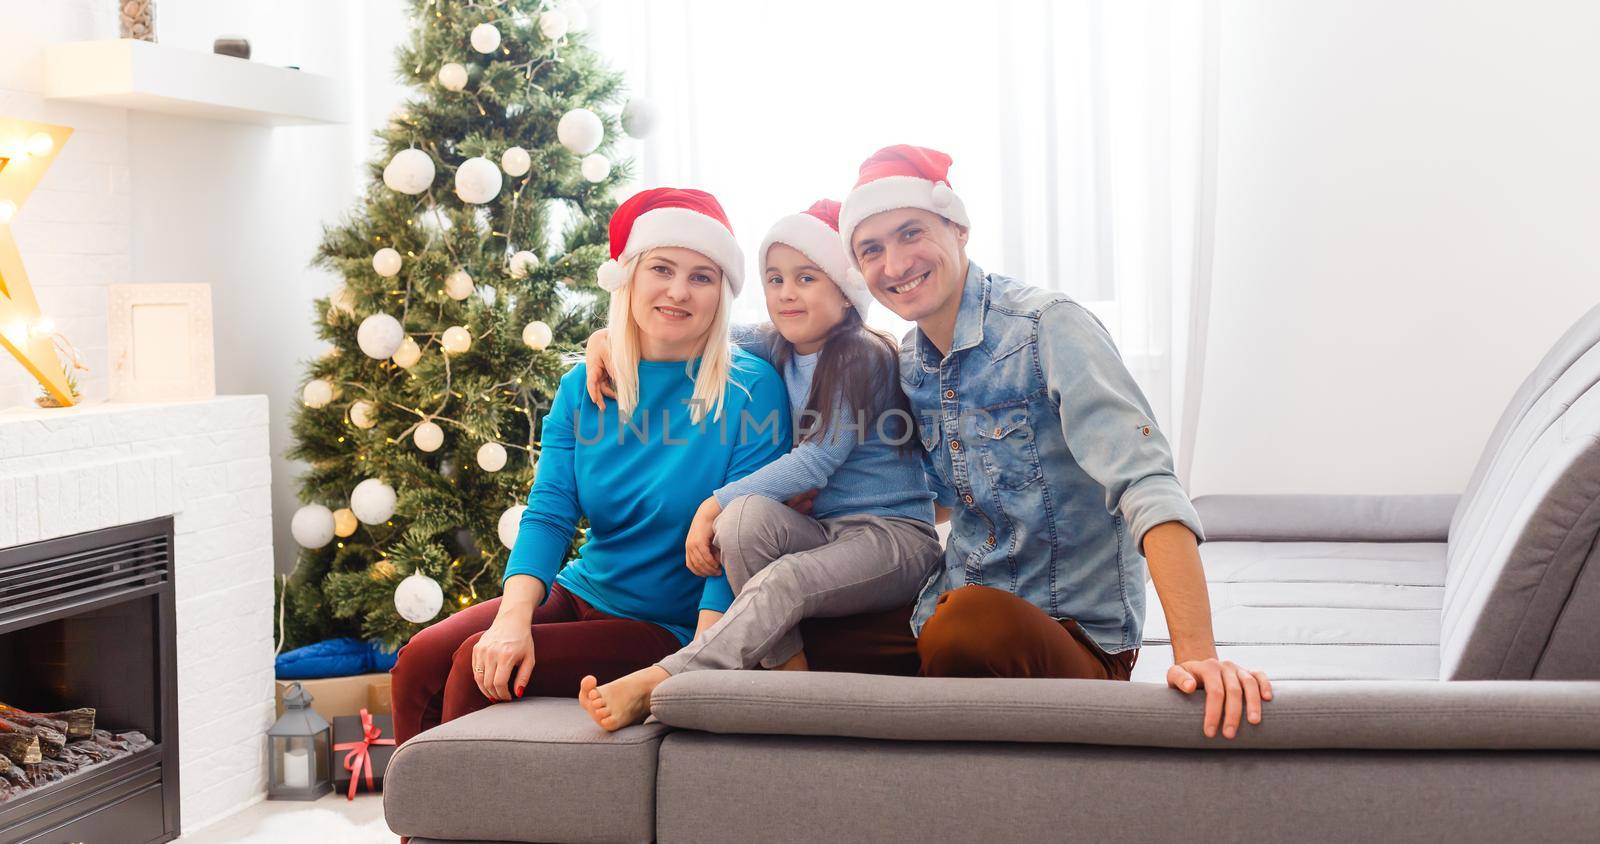 Young family on Christmas morning exchanging presents and enjoying their time together. by Andelov13